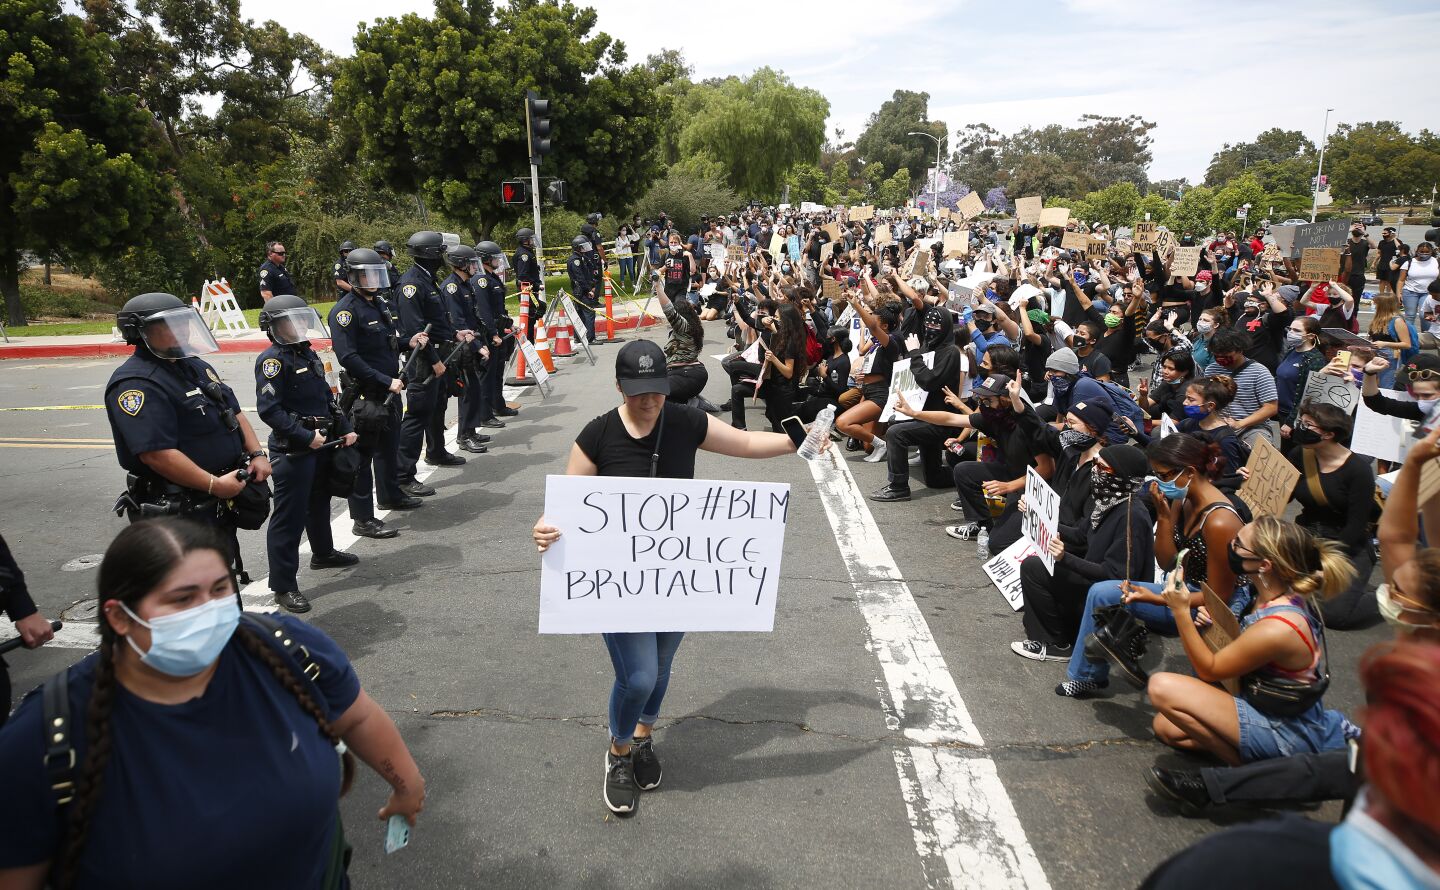 Youth protesters were briefly stopped going into Balboa Park, but were enventually let in on June 1, 2020. They were protesting police brutality and the recent death of George Floyd.